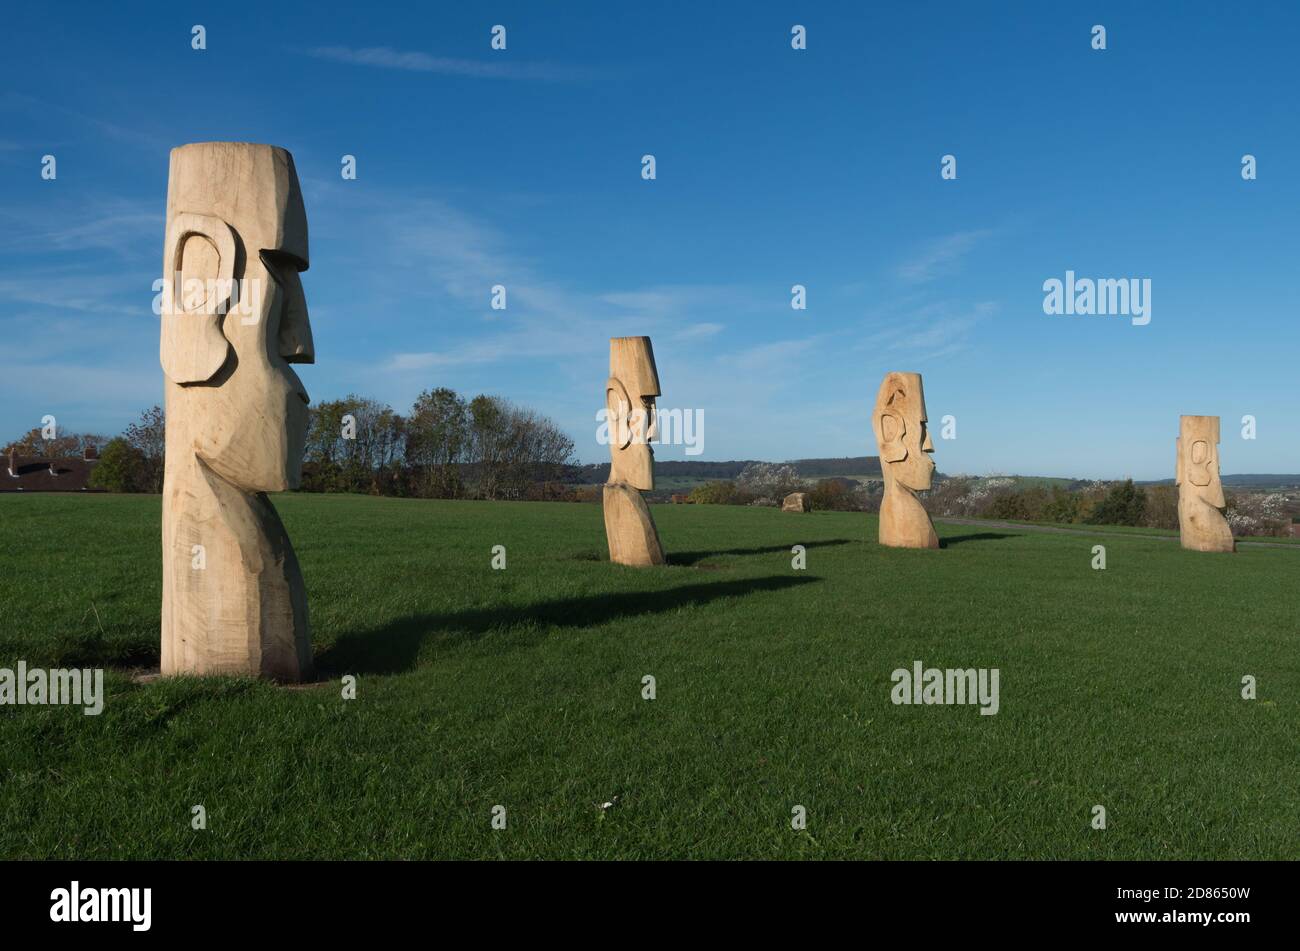 Ring of replica Easter Island carved wooden heads at Jonnos Field, seaside town of Scarbourough, North Yorkshire, UK Stock Photo